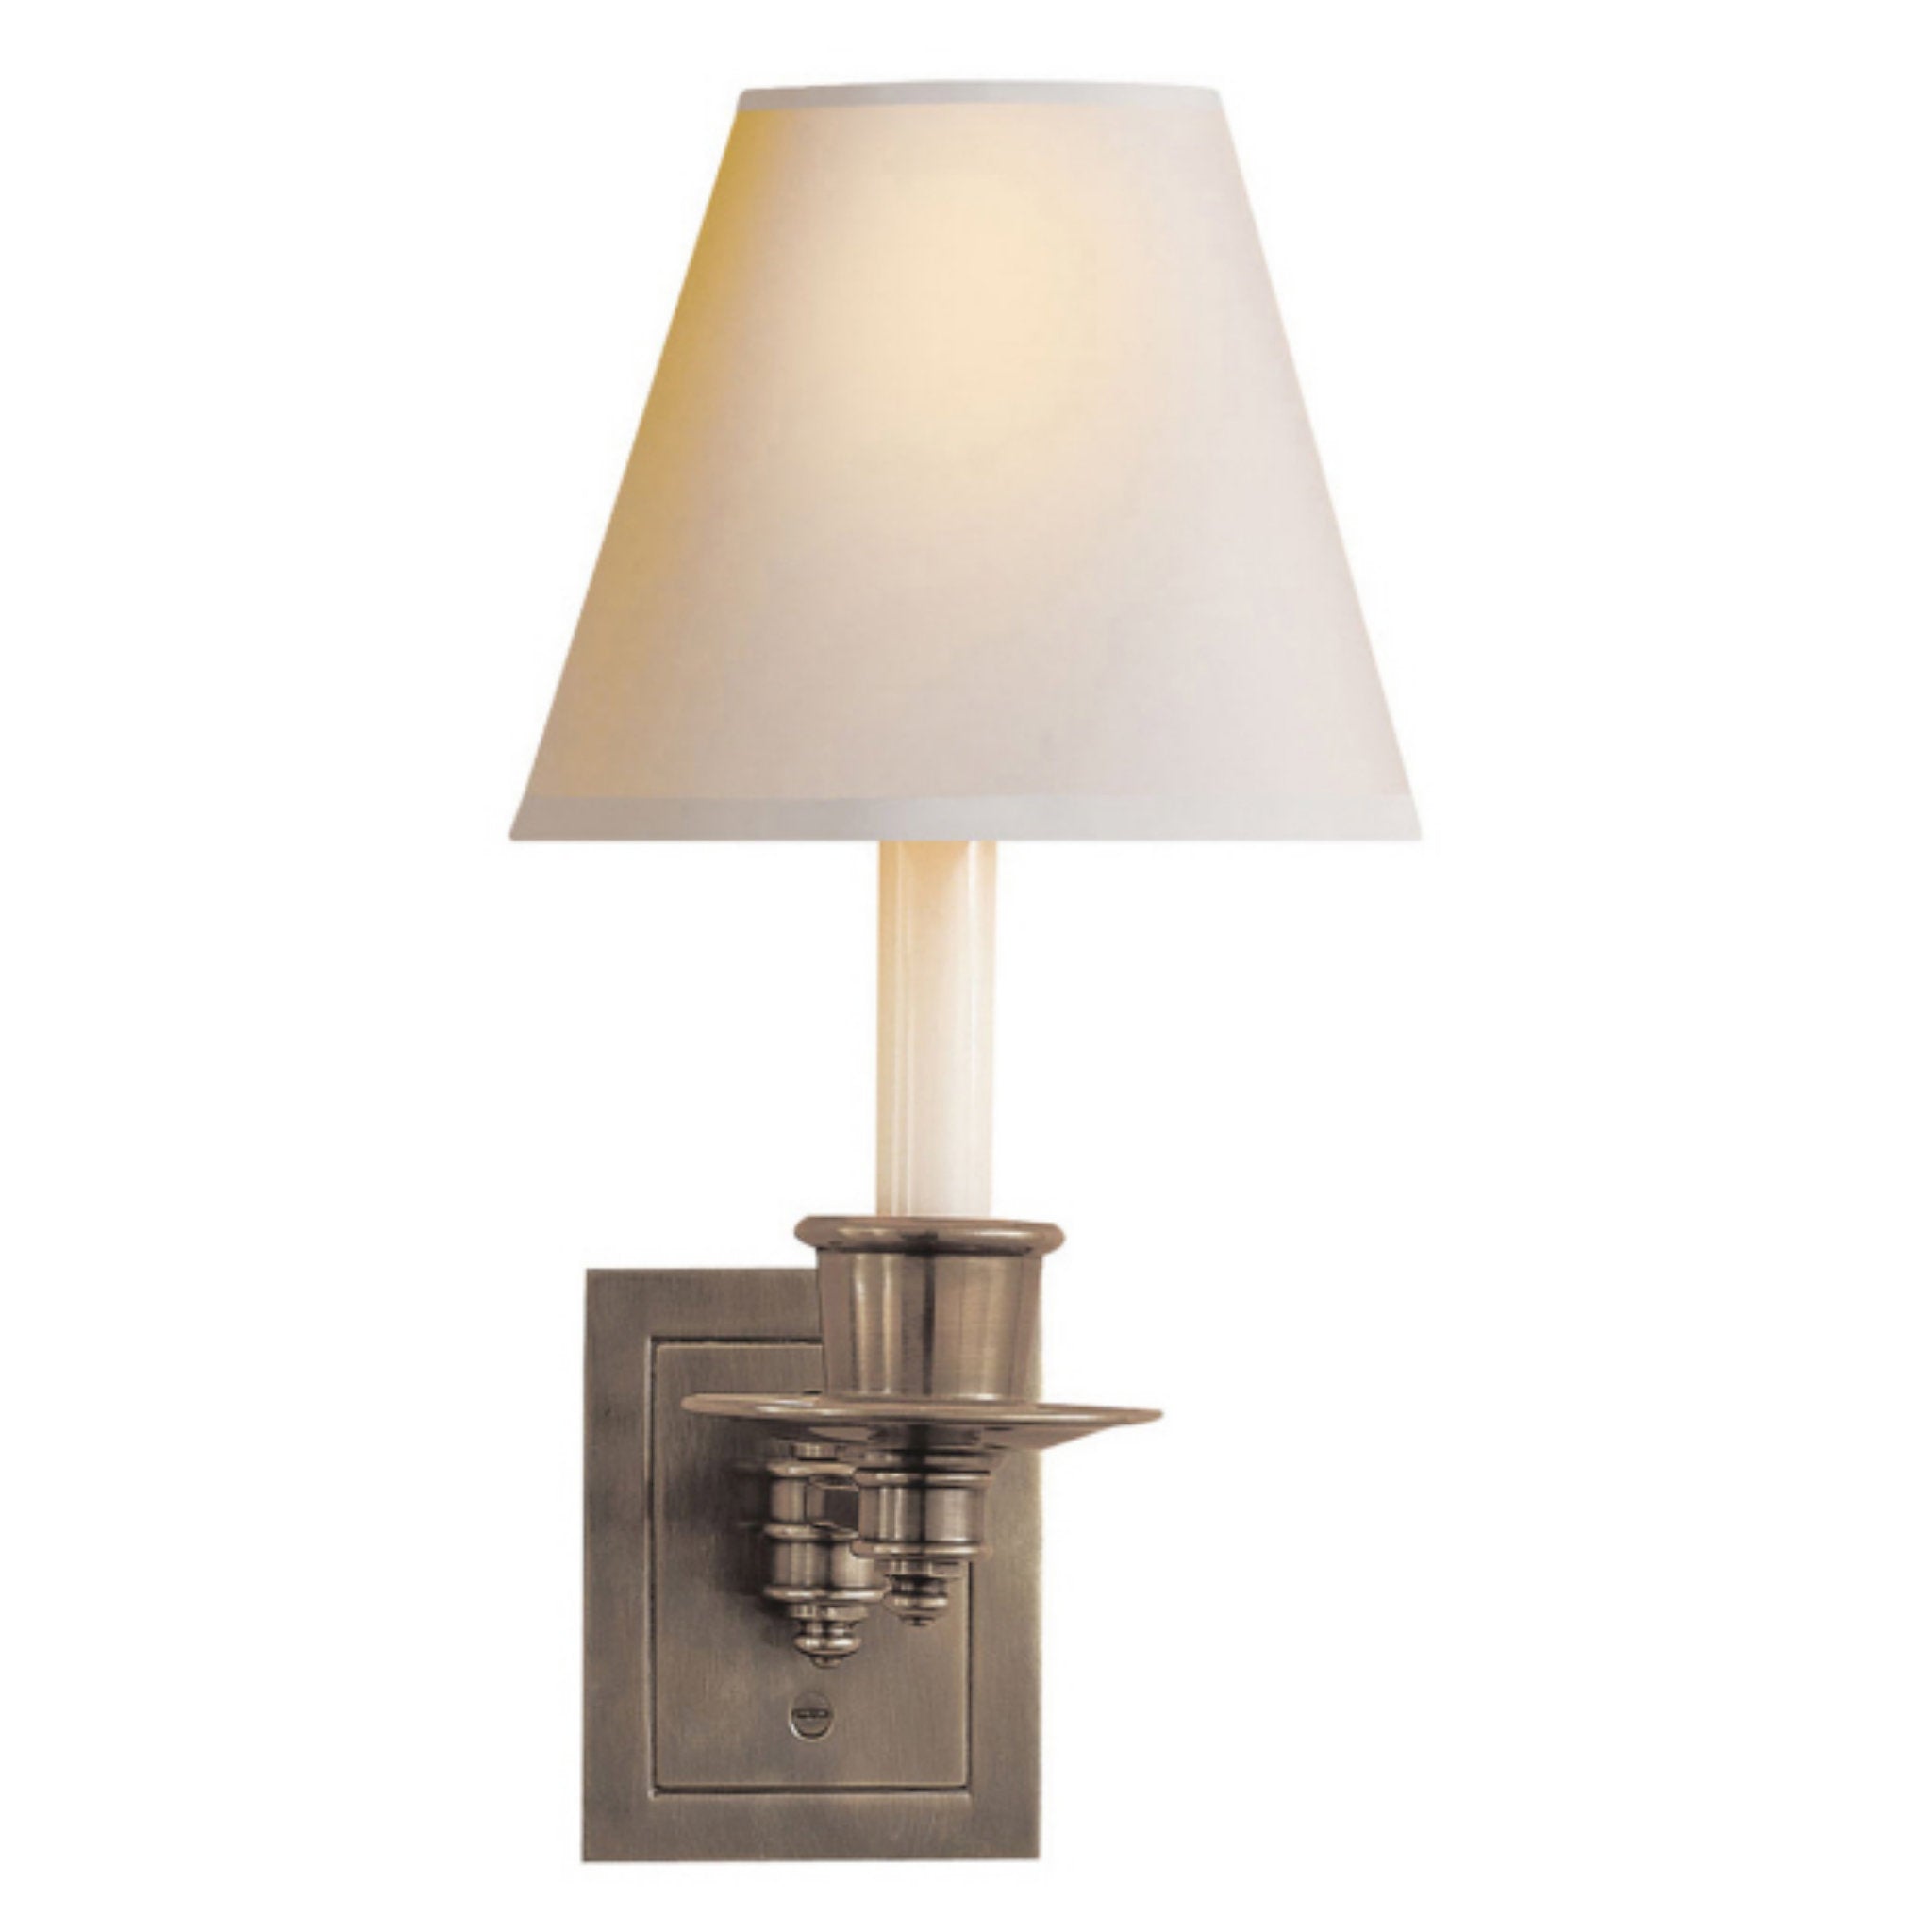 Visual Comfort Single Swing Arm Sconce in Antique Nickel with Natural Paper Shade